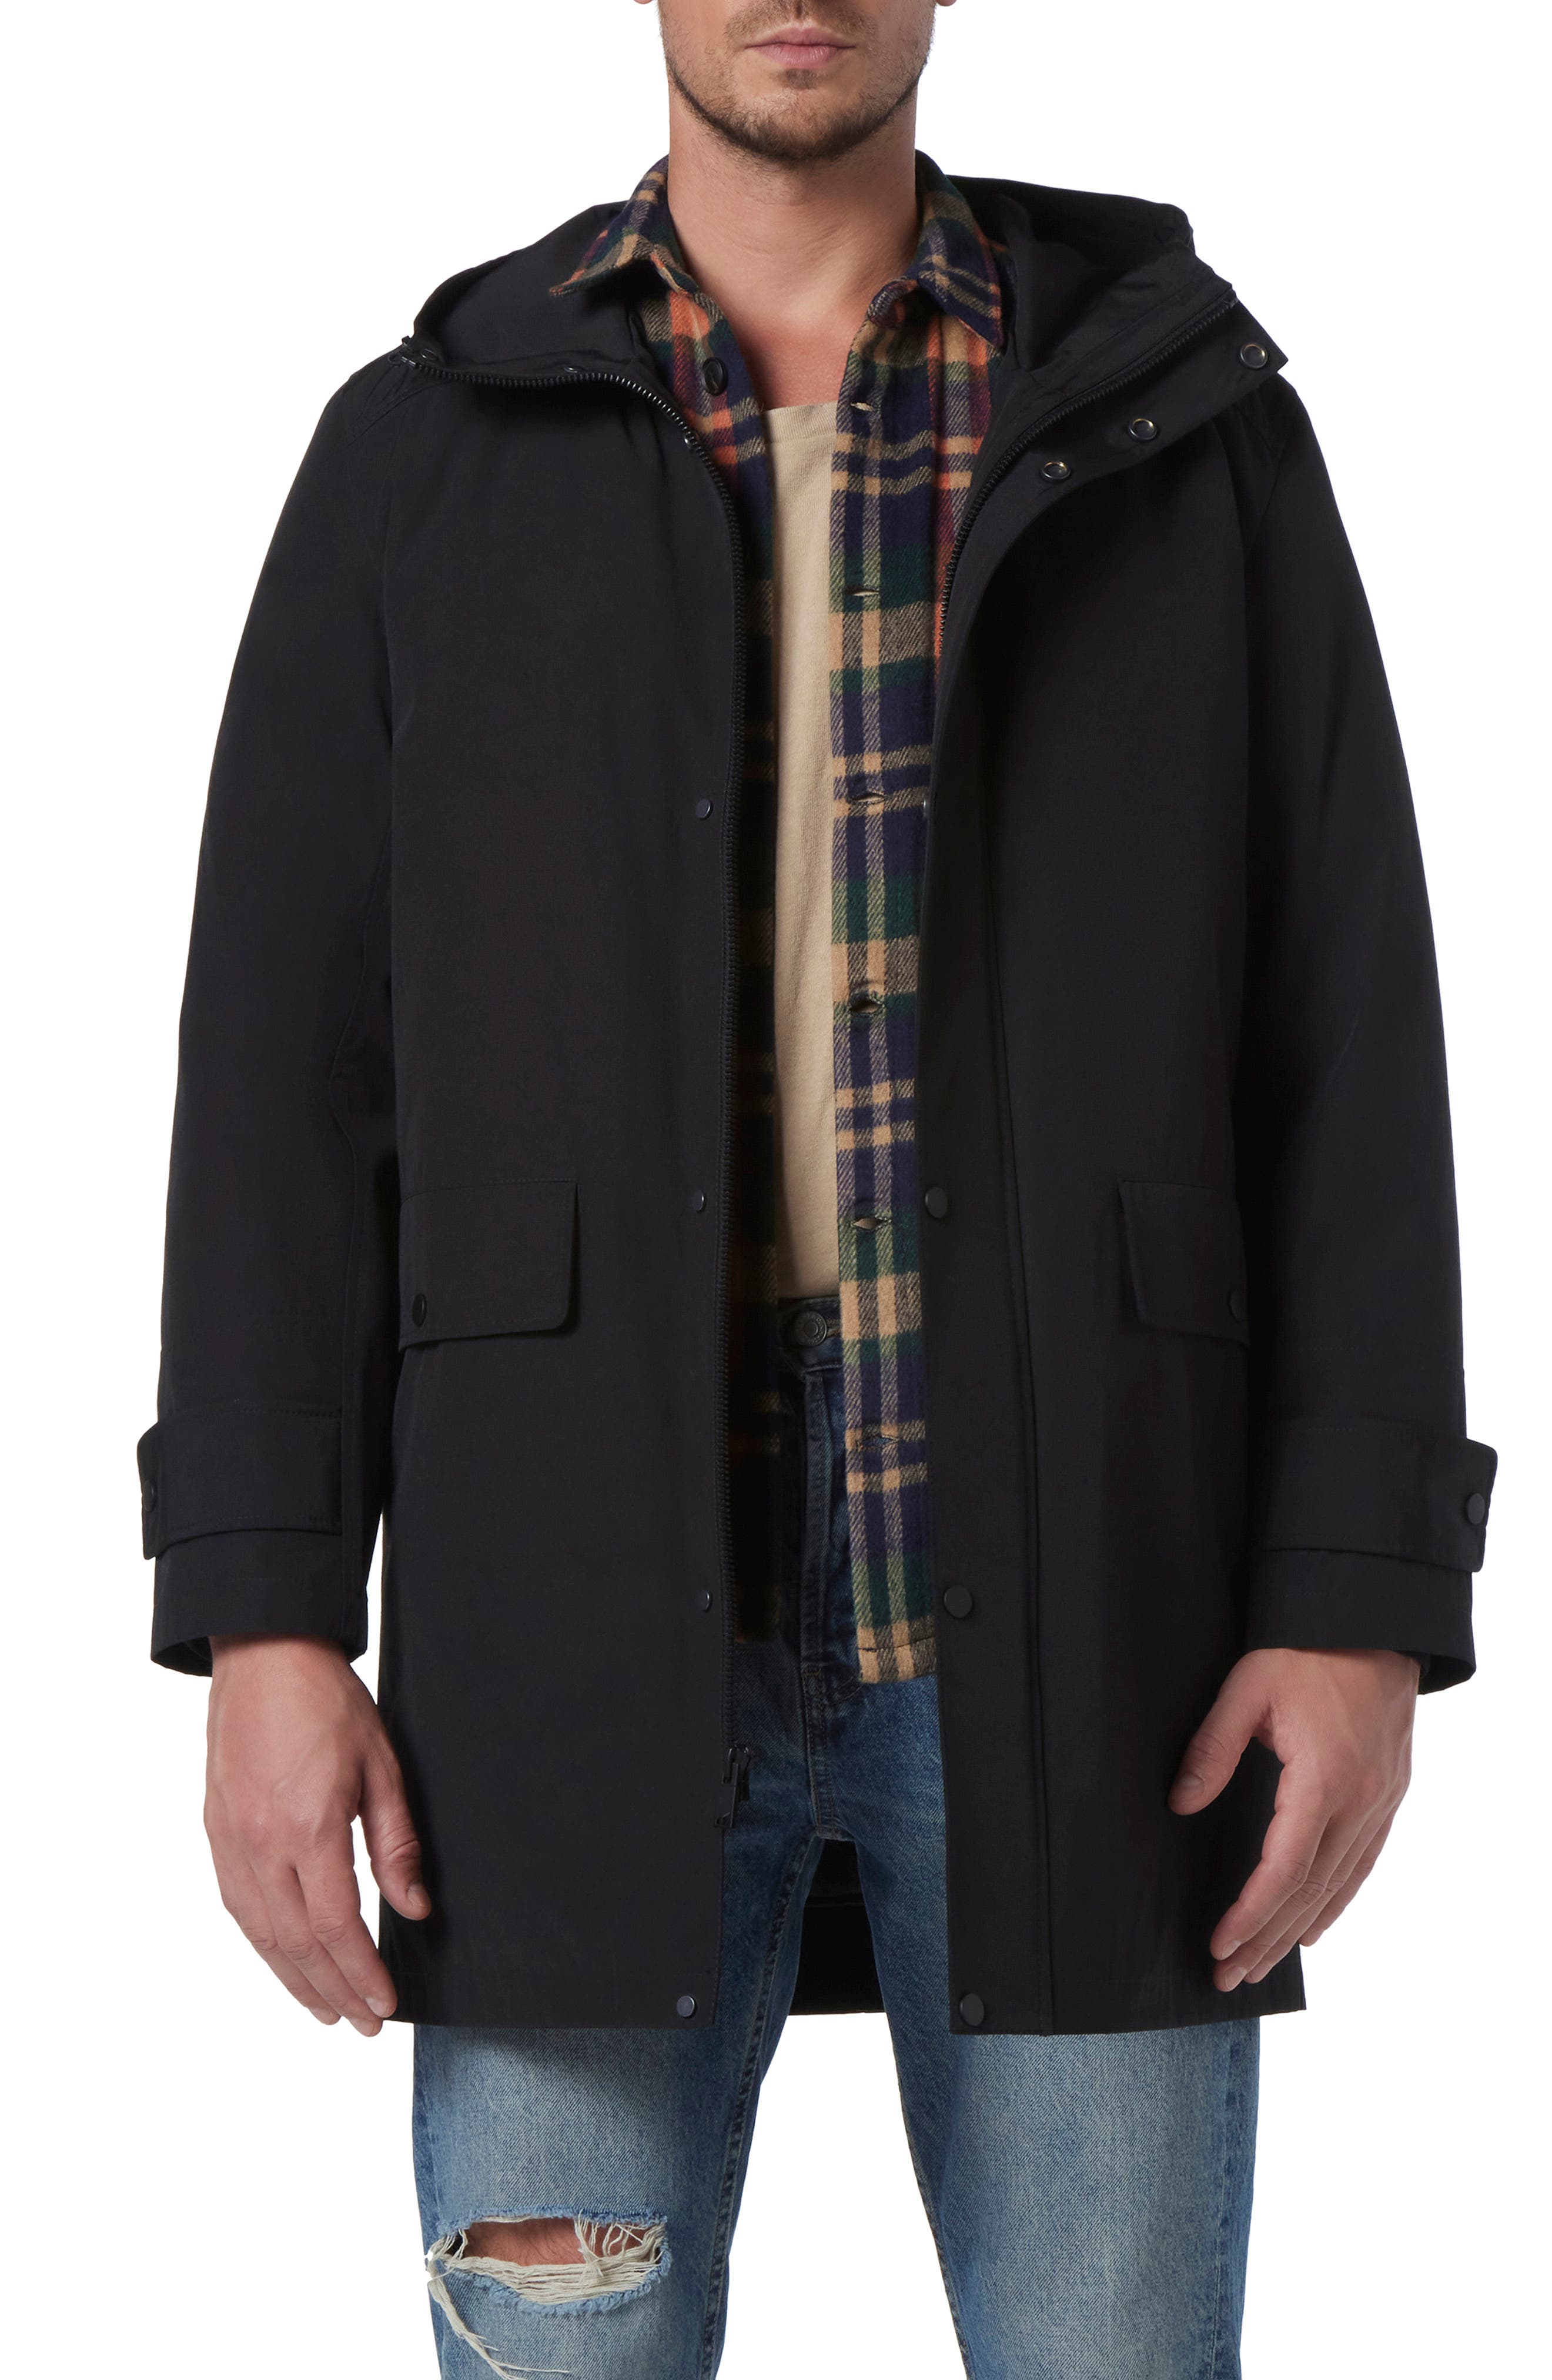 Nordstrom Men Clothing Jackets Ponchos & Capes Mens Foray II Waterproof Jacket in Black at Nordstrom 